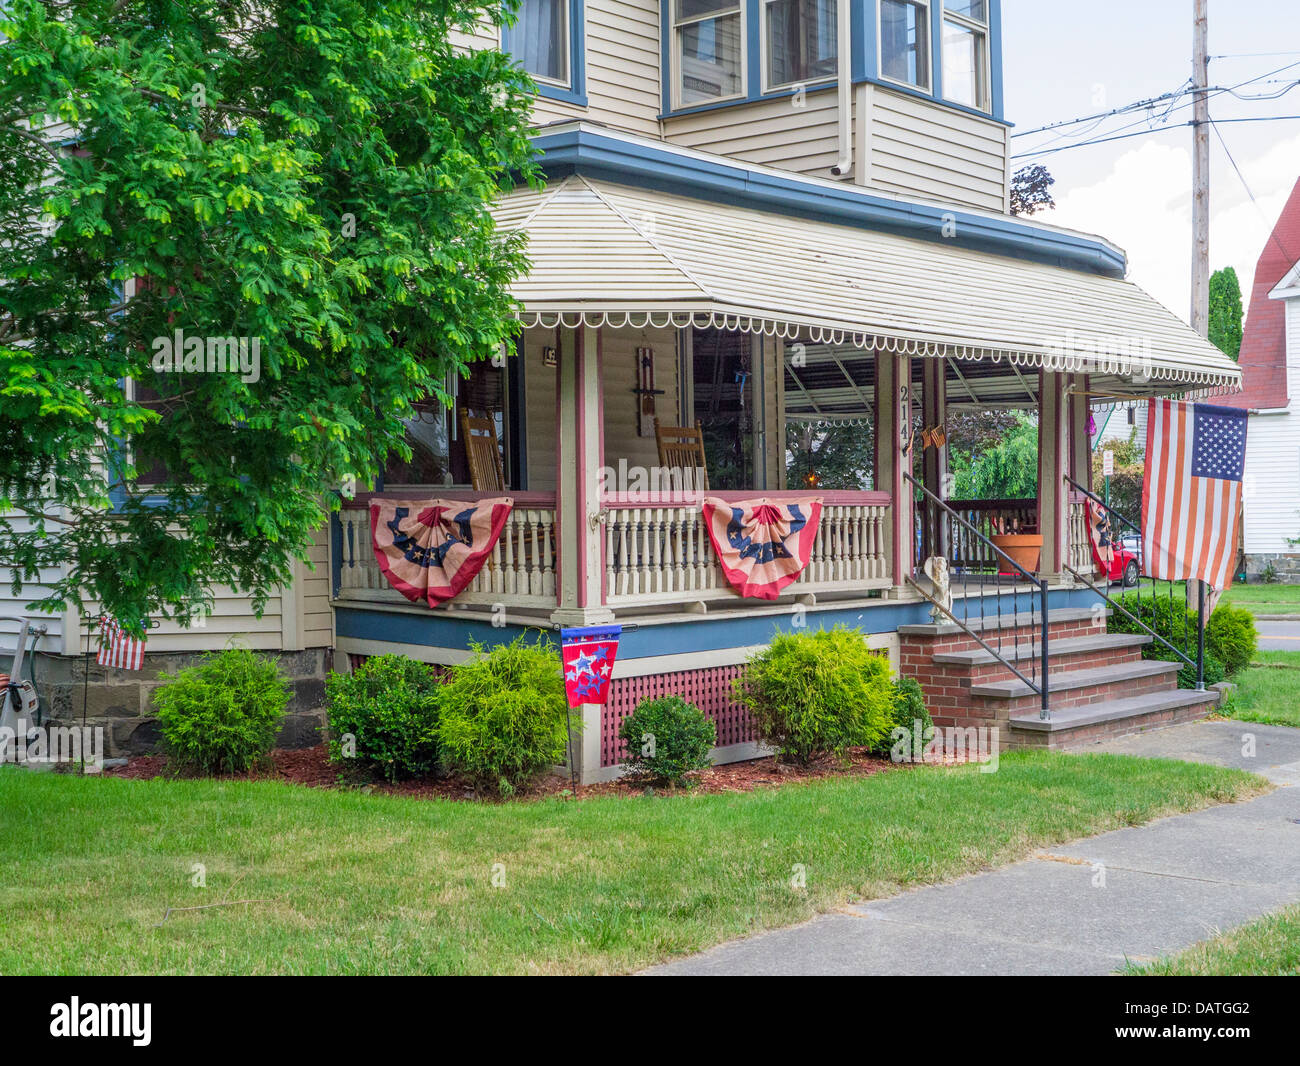 House with flags on porch railings in Watkins Glen New York in the Finger Lakes Region of NY State Stock Photo